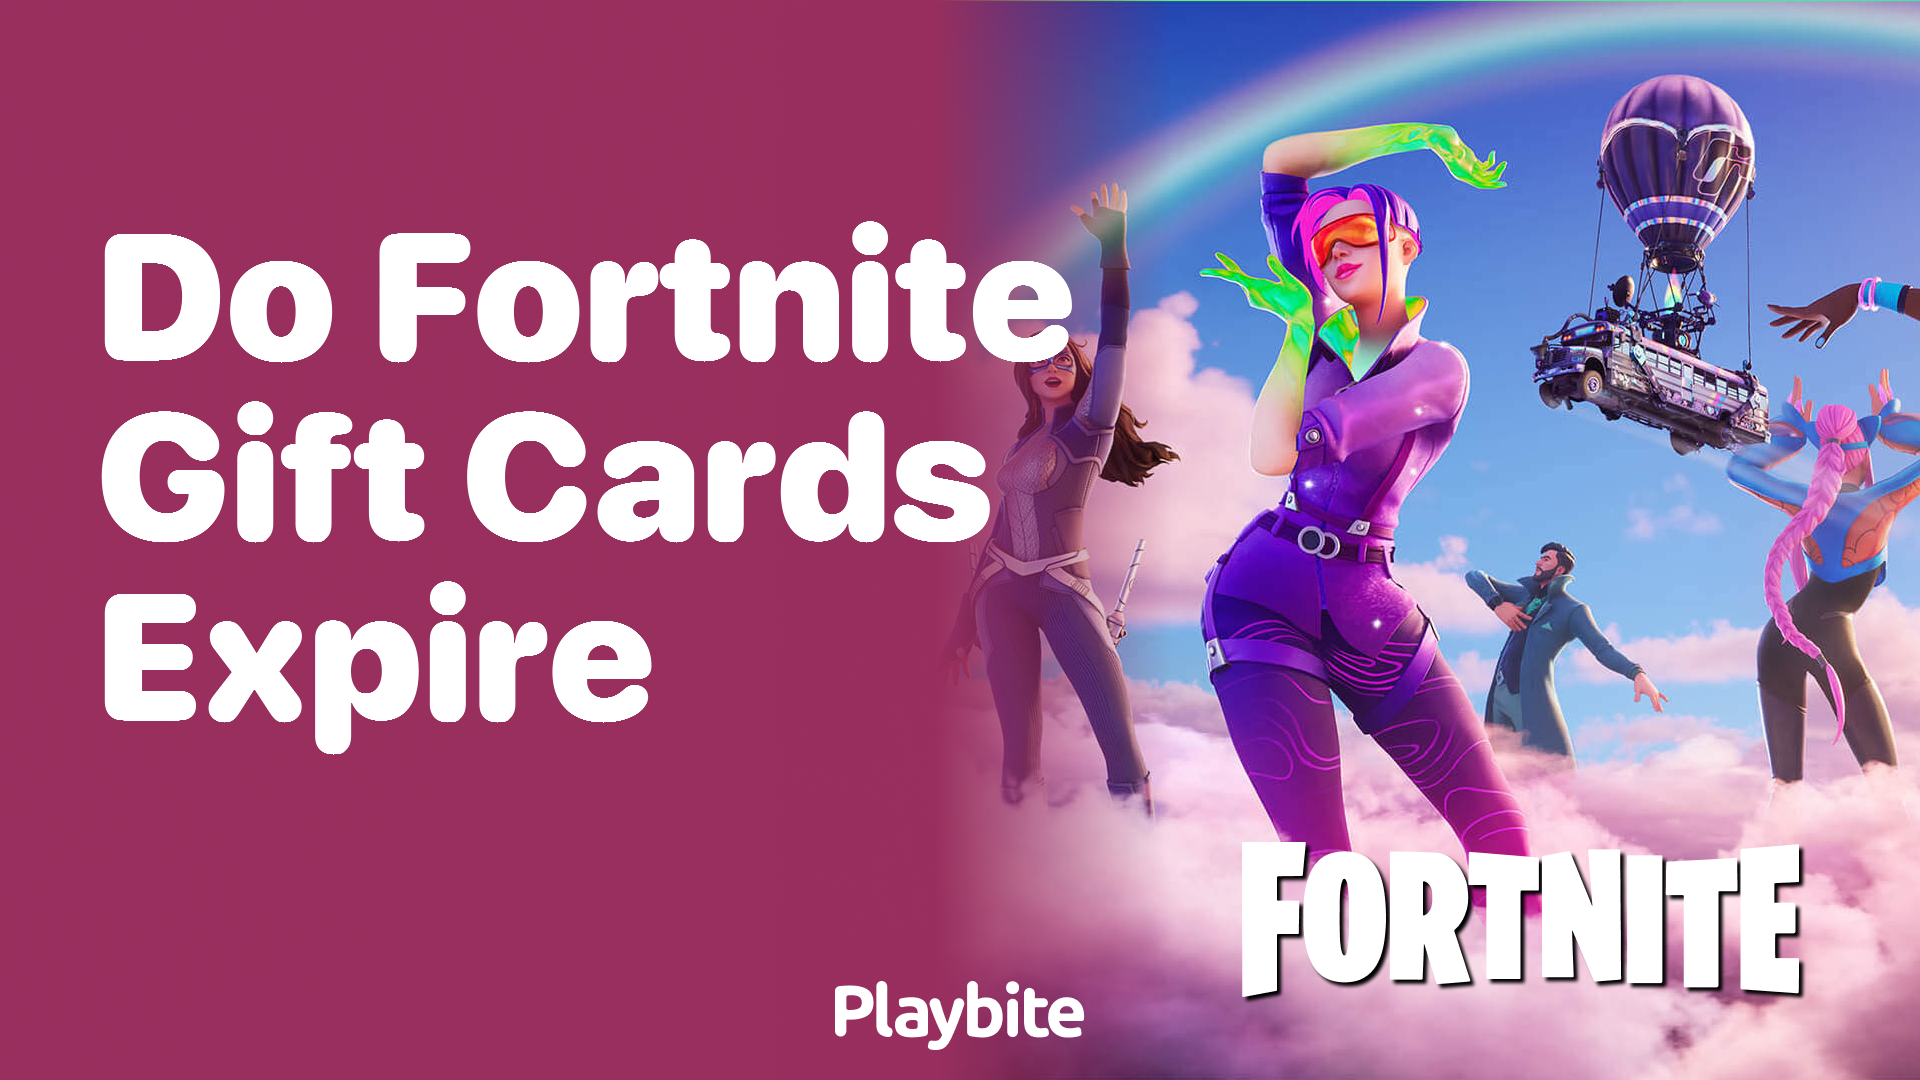 Do Fortnite Gift Cards Expire? Find Out Here!